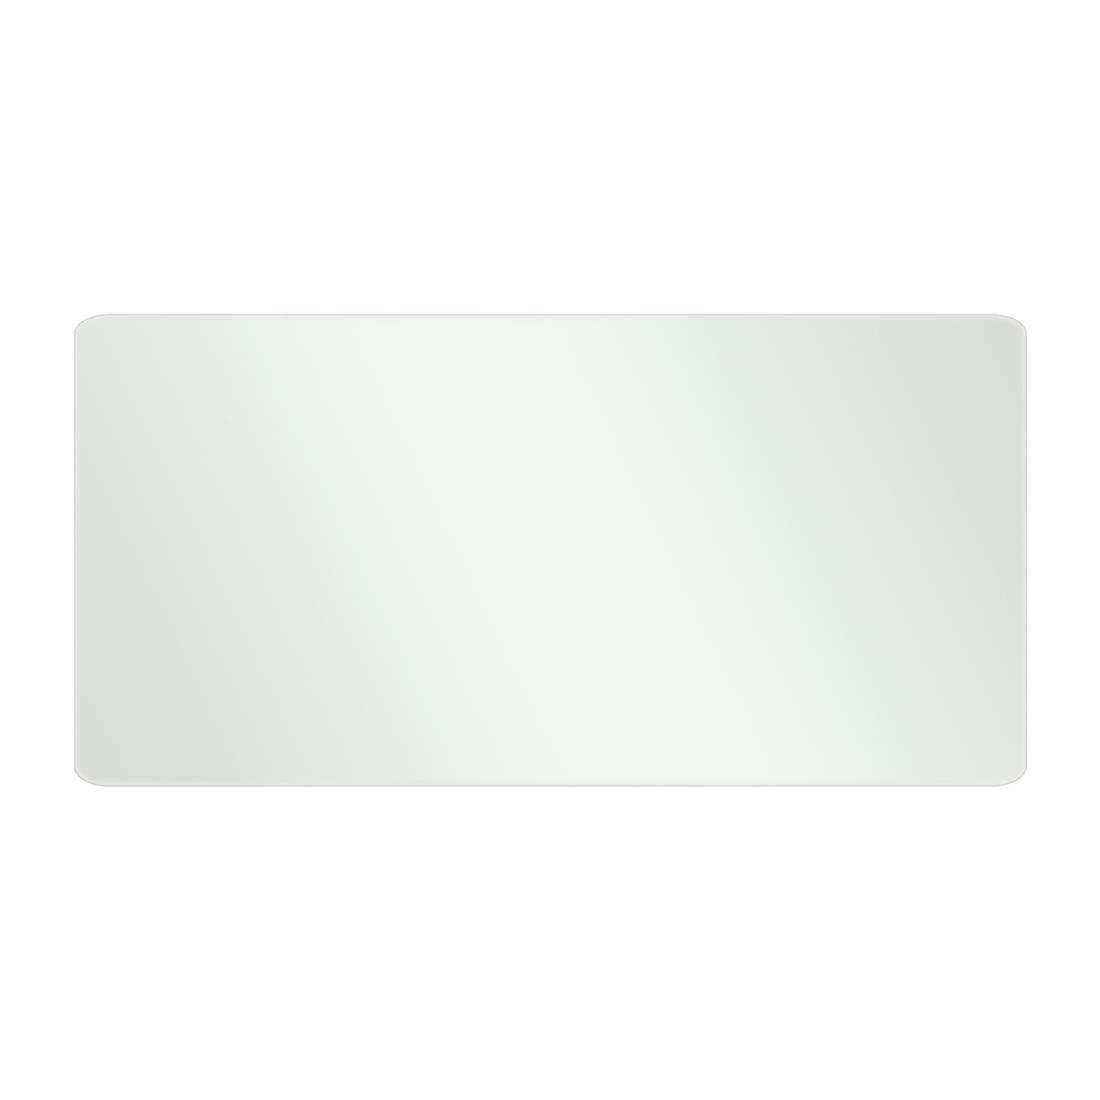 Front Glass Panel for Buffalo Pie Cabinet - AE651  - 1